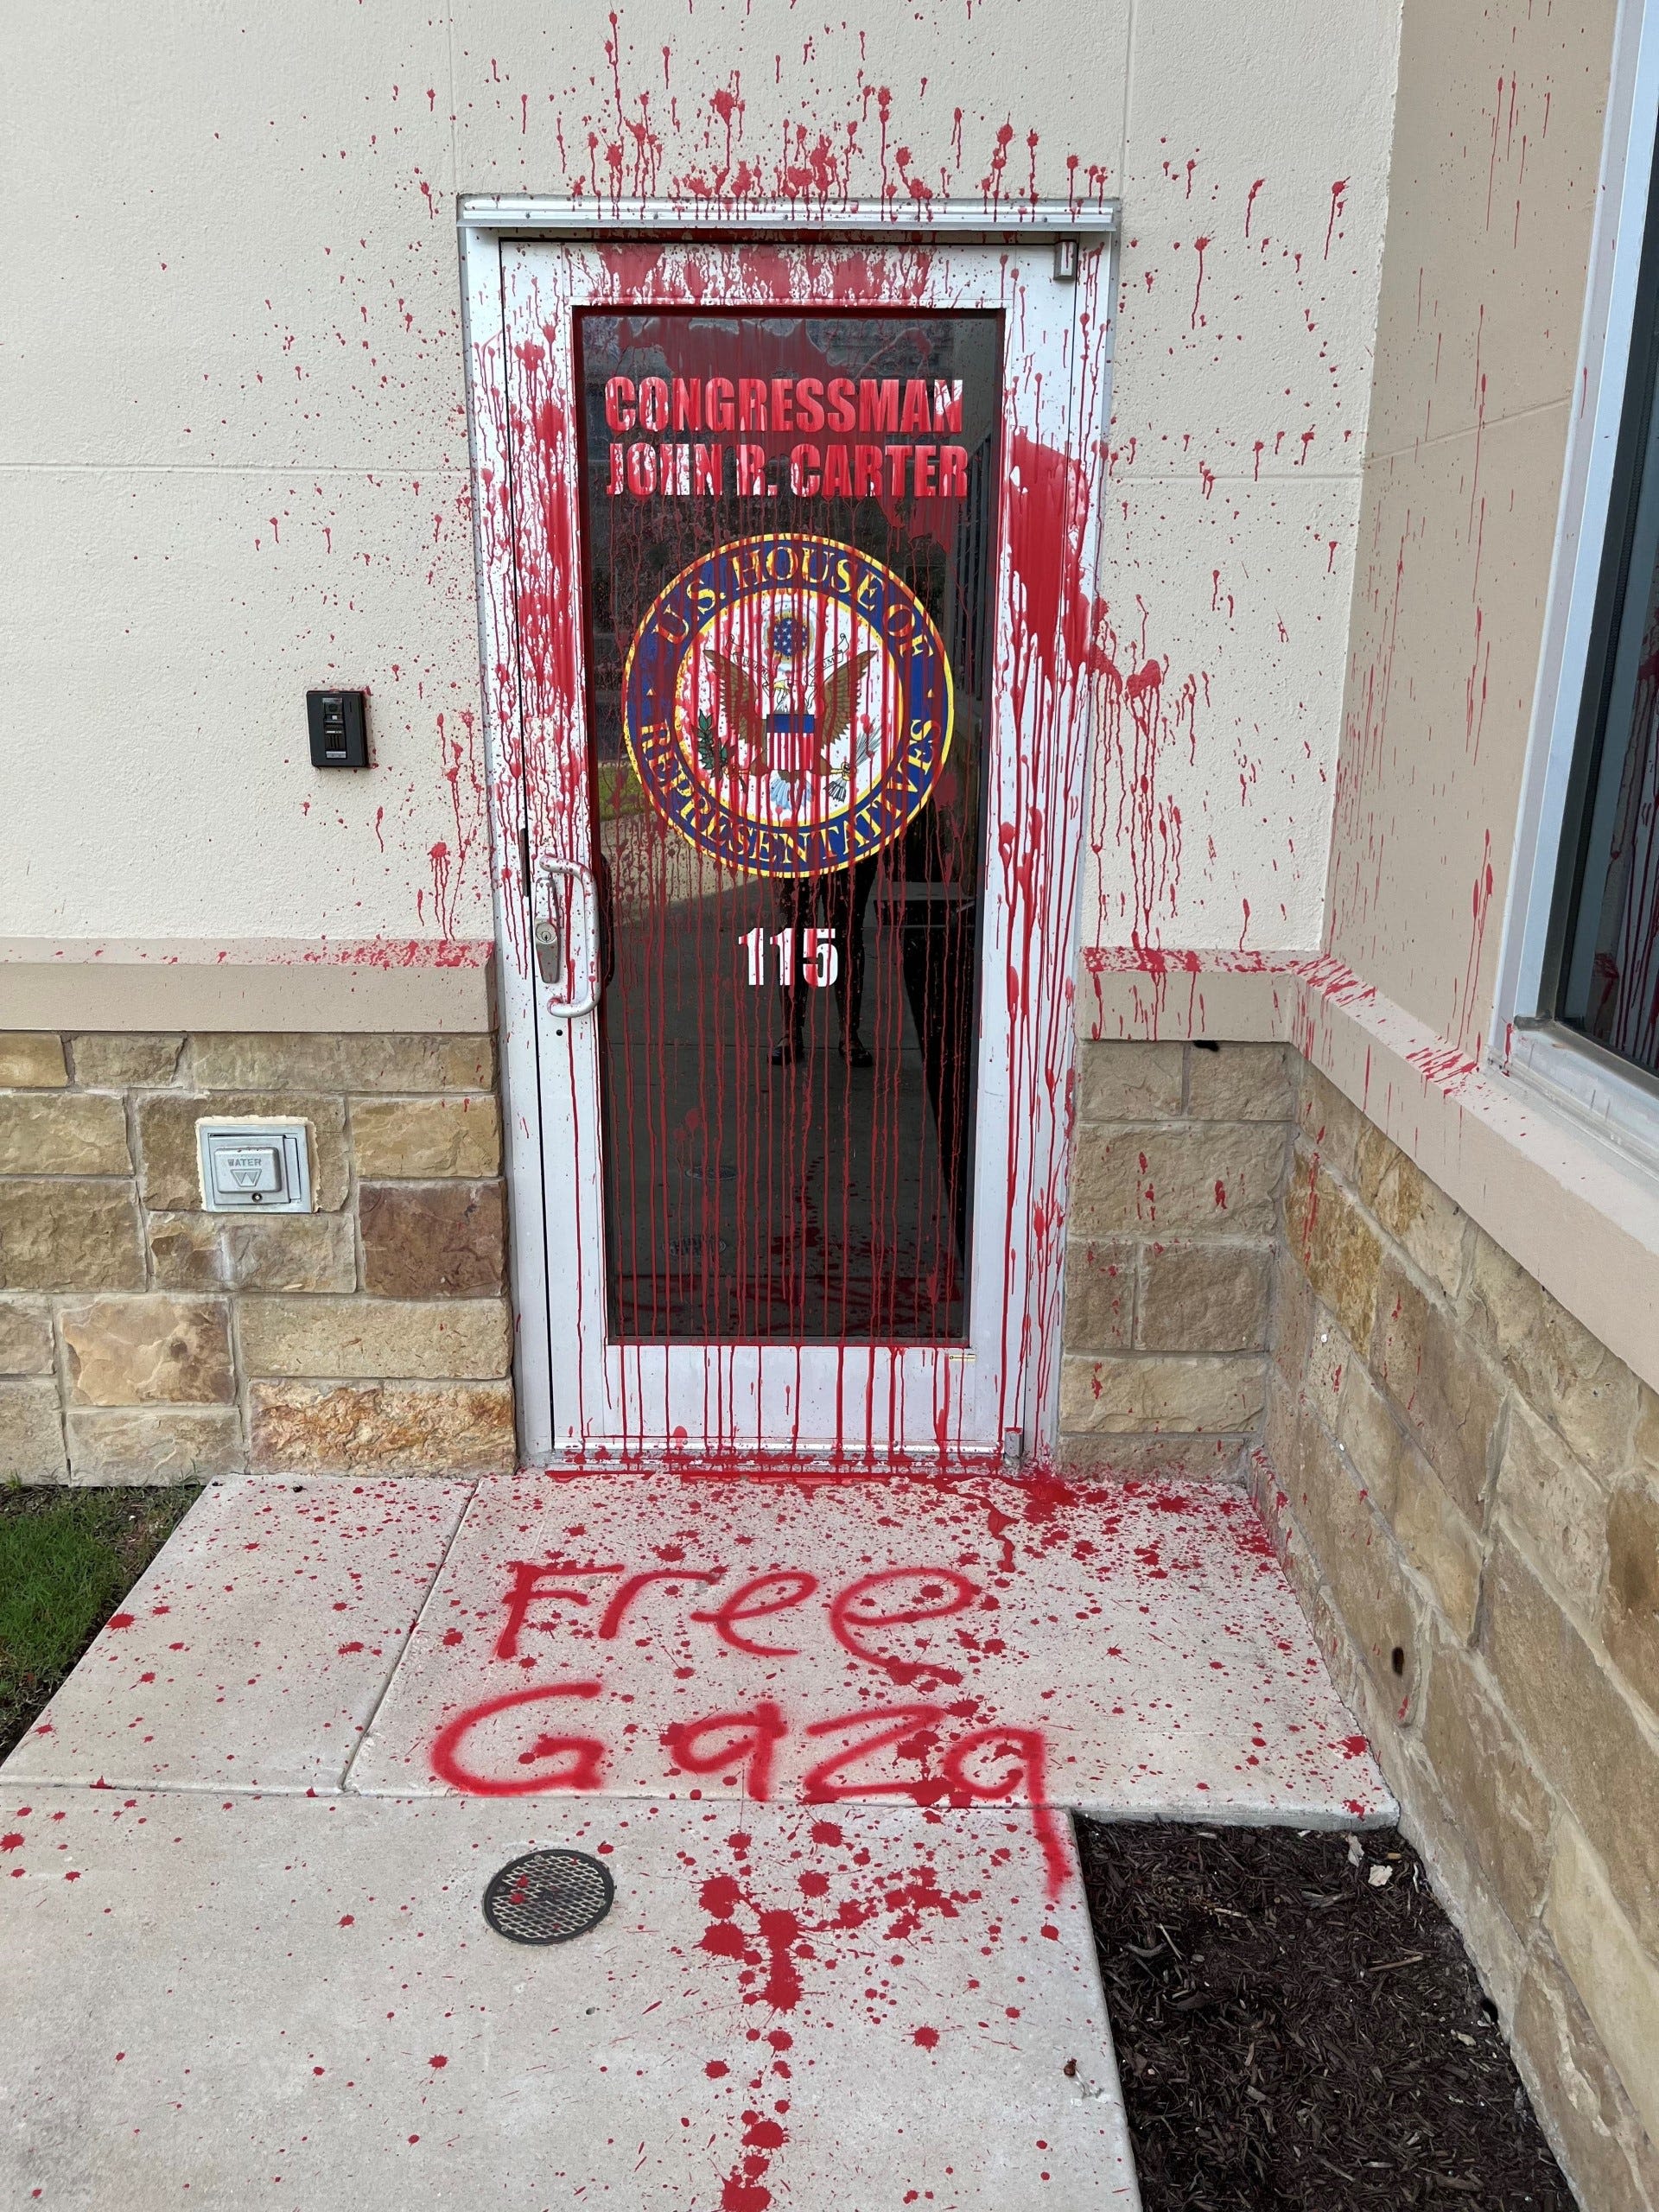 Salado man charged in graffiti incident at U.S. Rep. John Carter's office in Georgetown